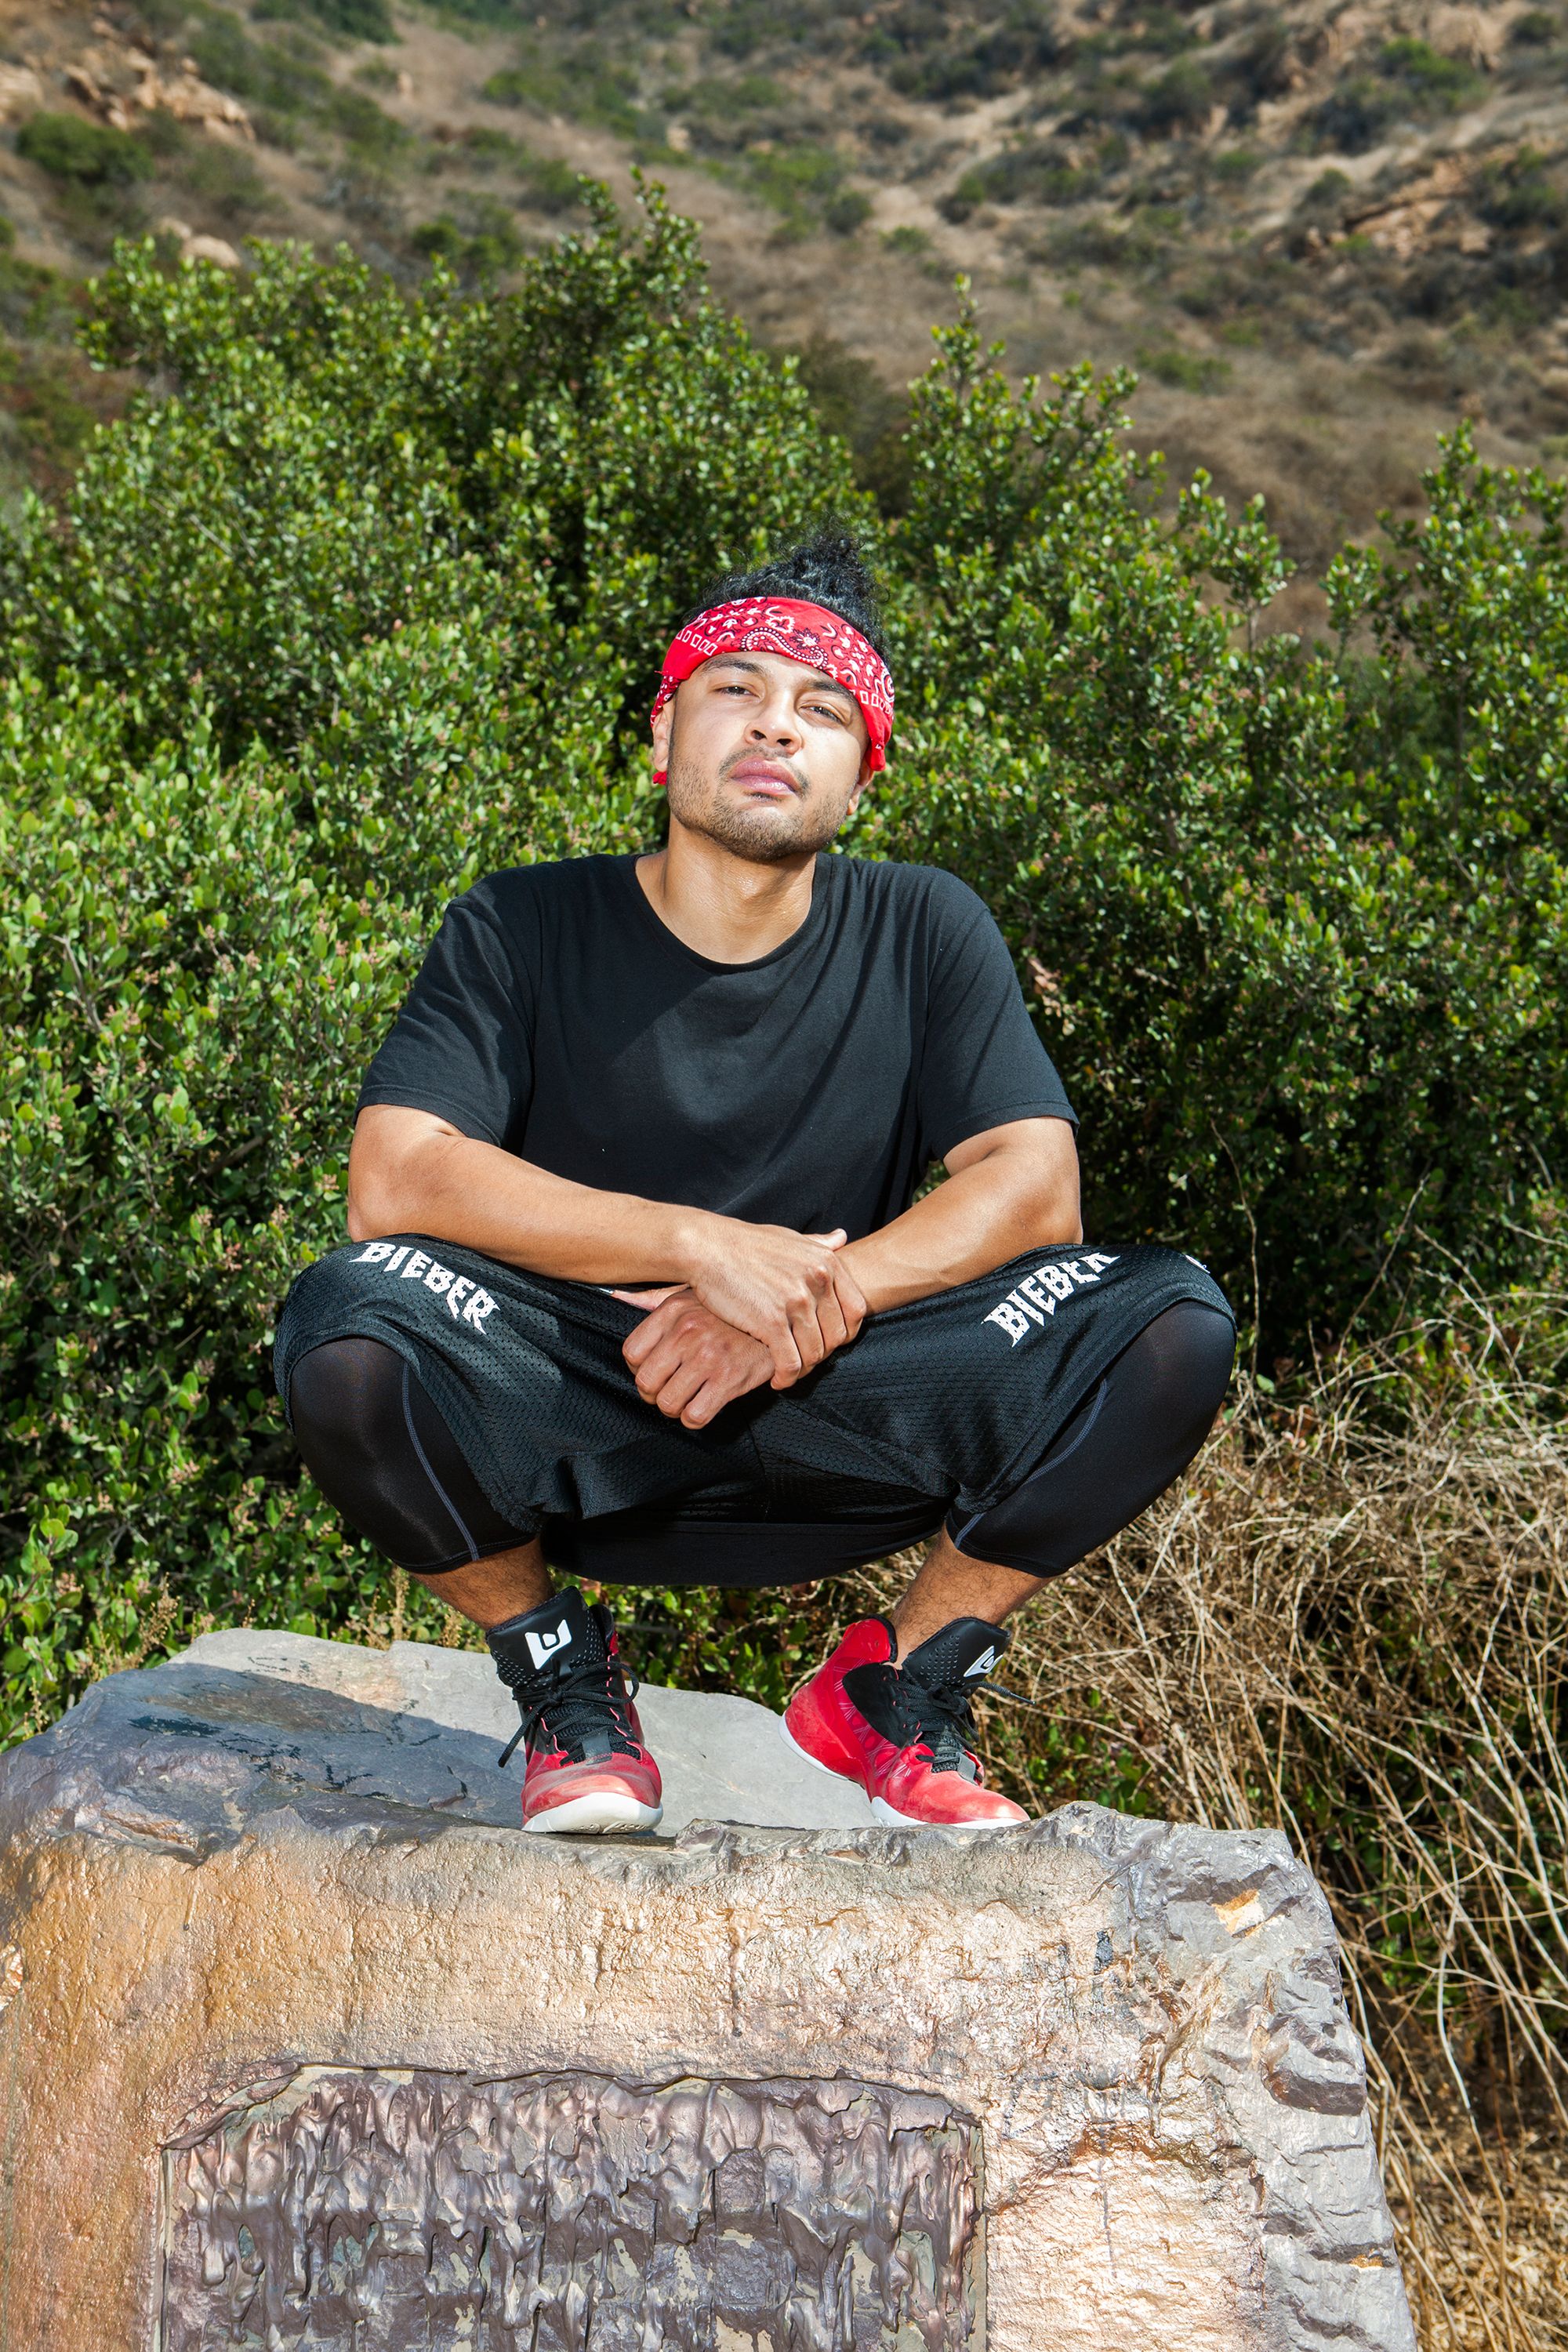 a day in the life of ariana grande photog & bieber bff alfredo flores